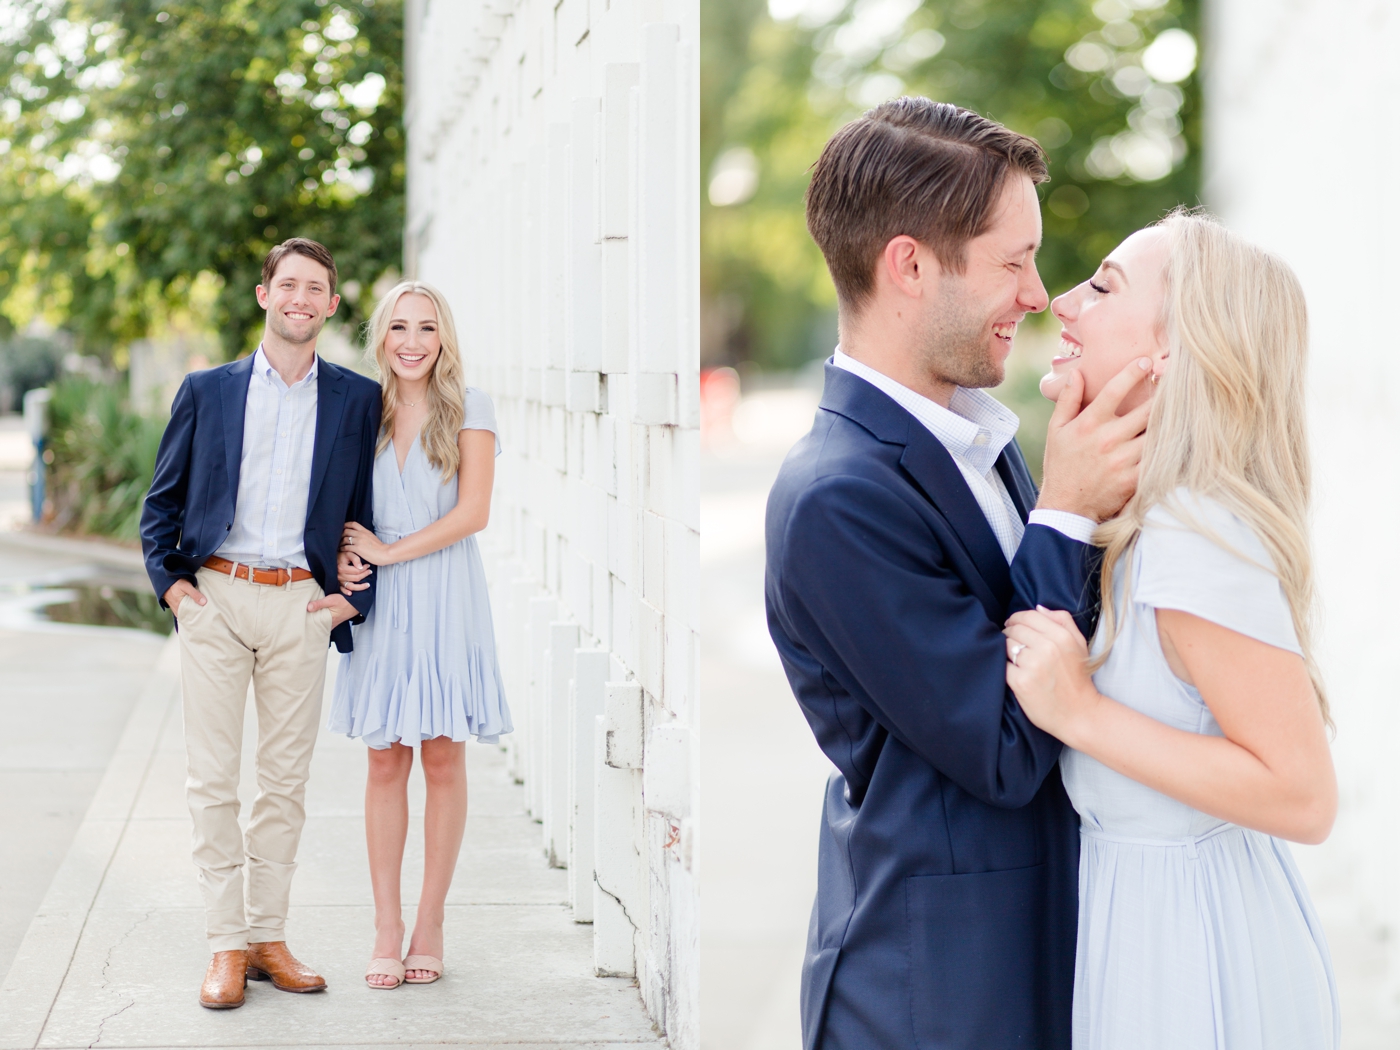 Engagement session in downtown Tulsa